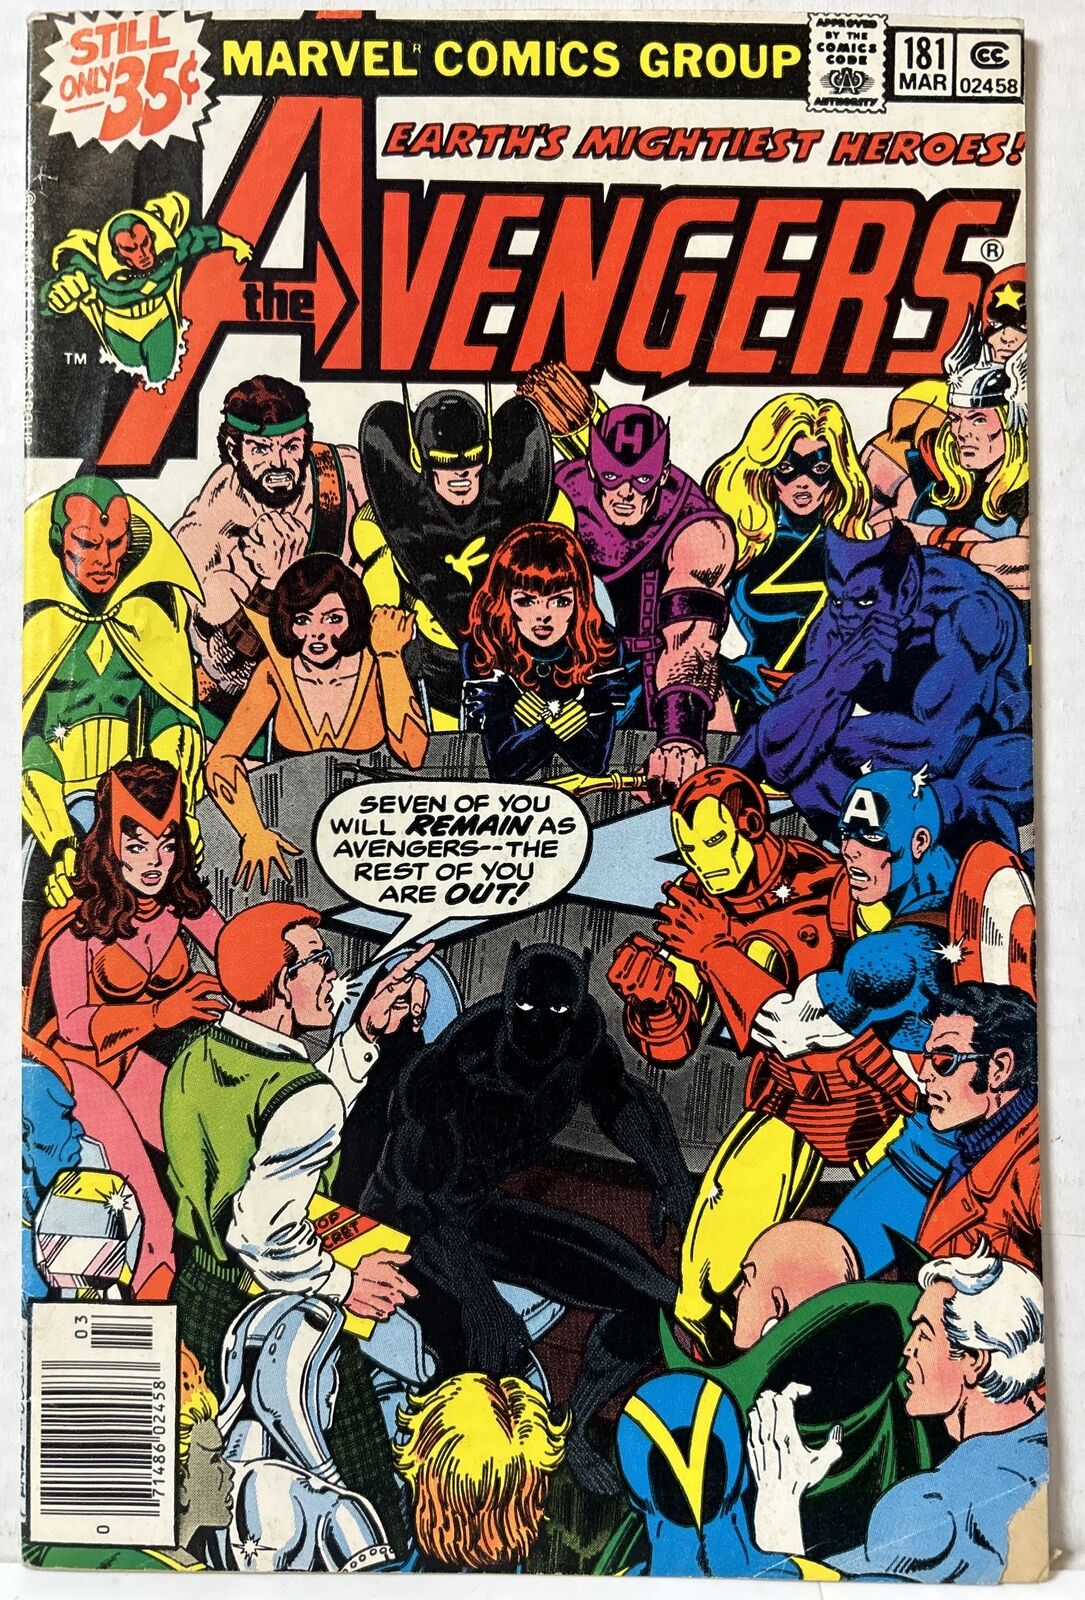 the Avengers #181 1978 First appearance of Scott Lang (the second Ant-Man)